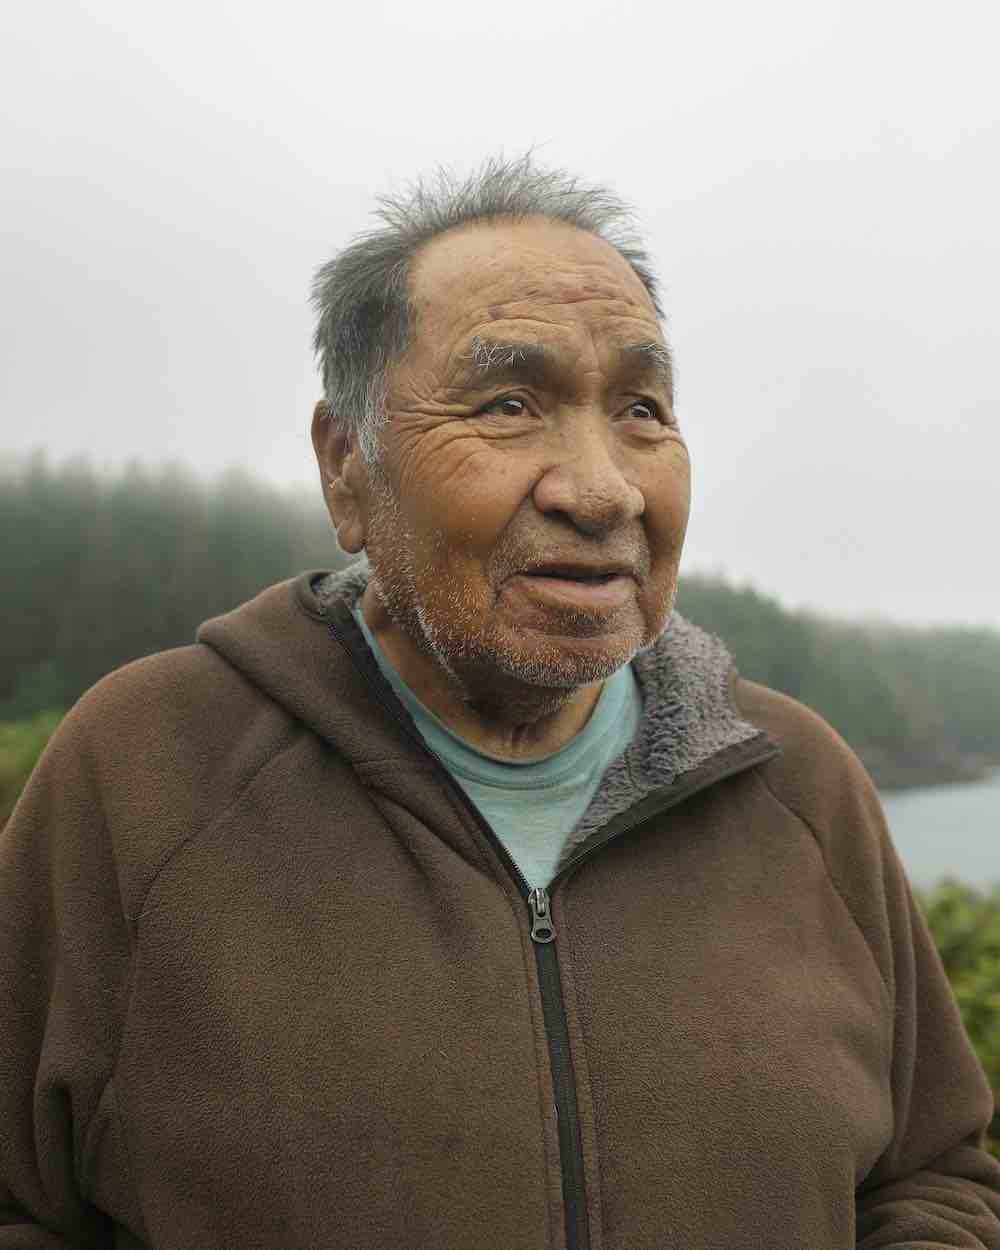 Ray Williams is an elderly Indigenous man with medium skin tone, short dark hair and a brown zip-up hoodie with fleece lining over a turquoise T-shirt. In the soft-focus background is a grey sky and a stand of coniferous trees.